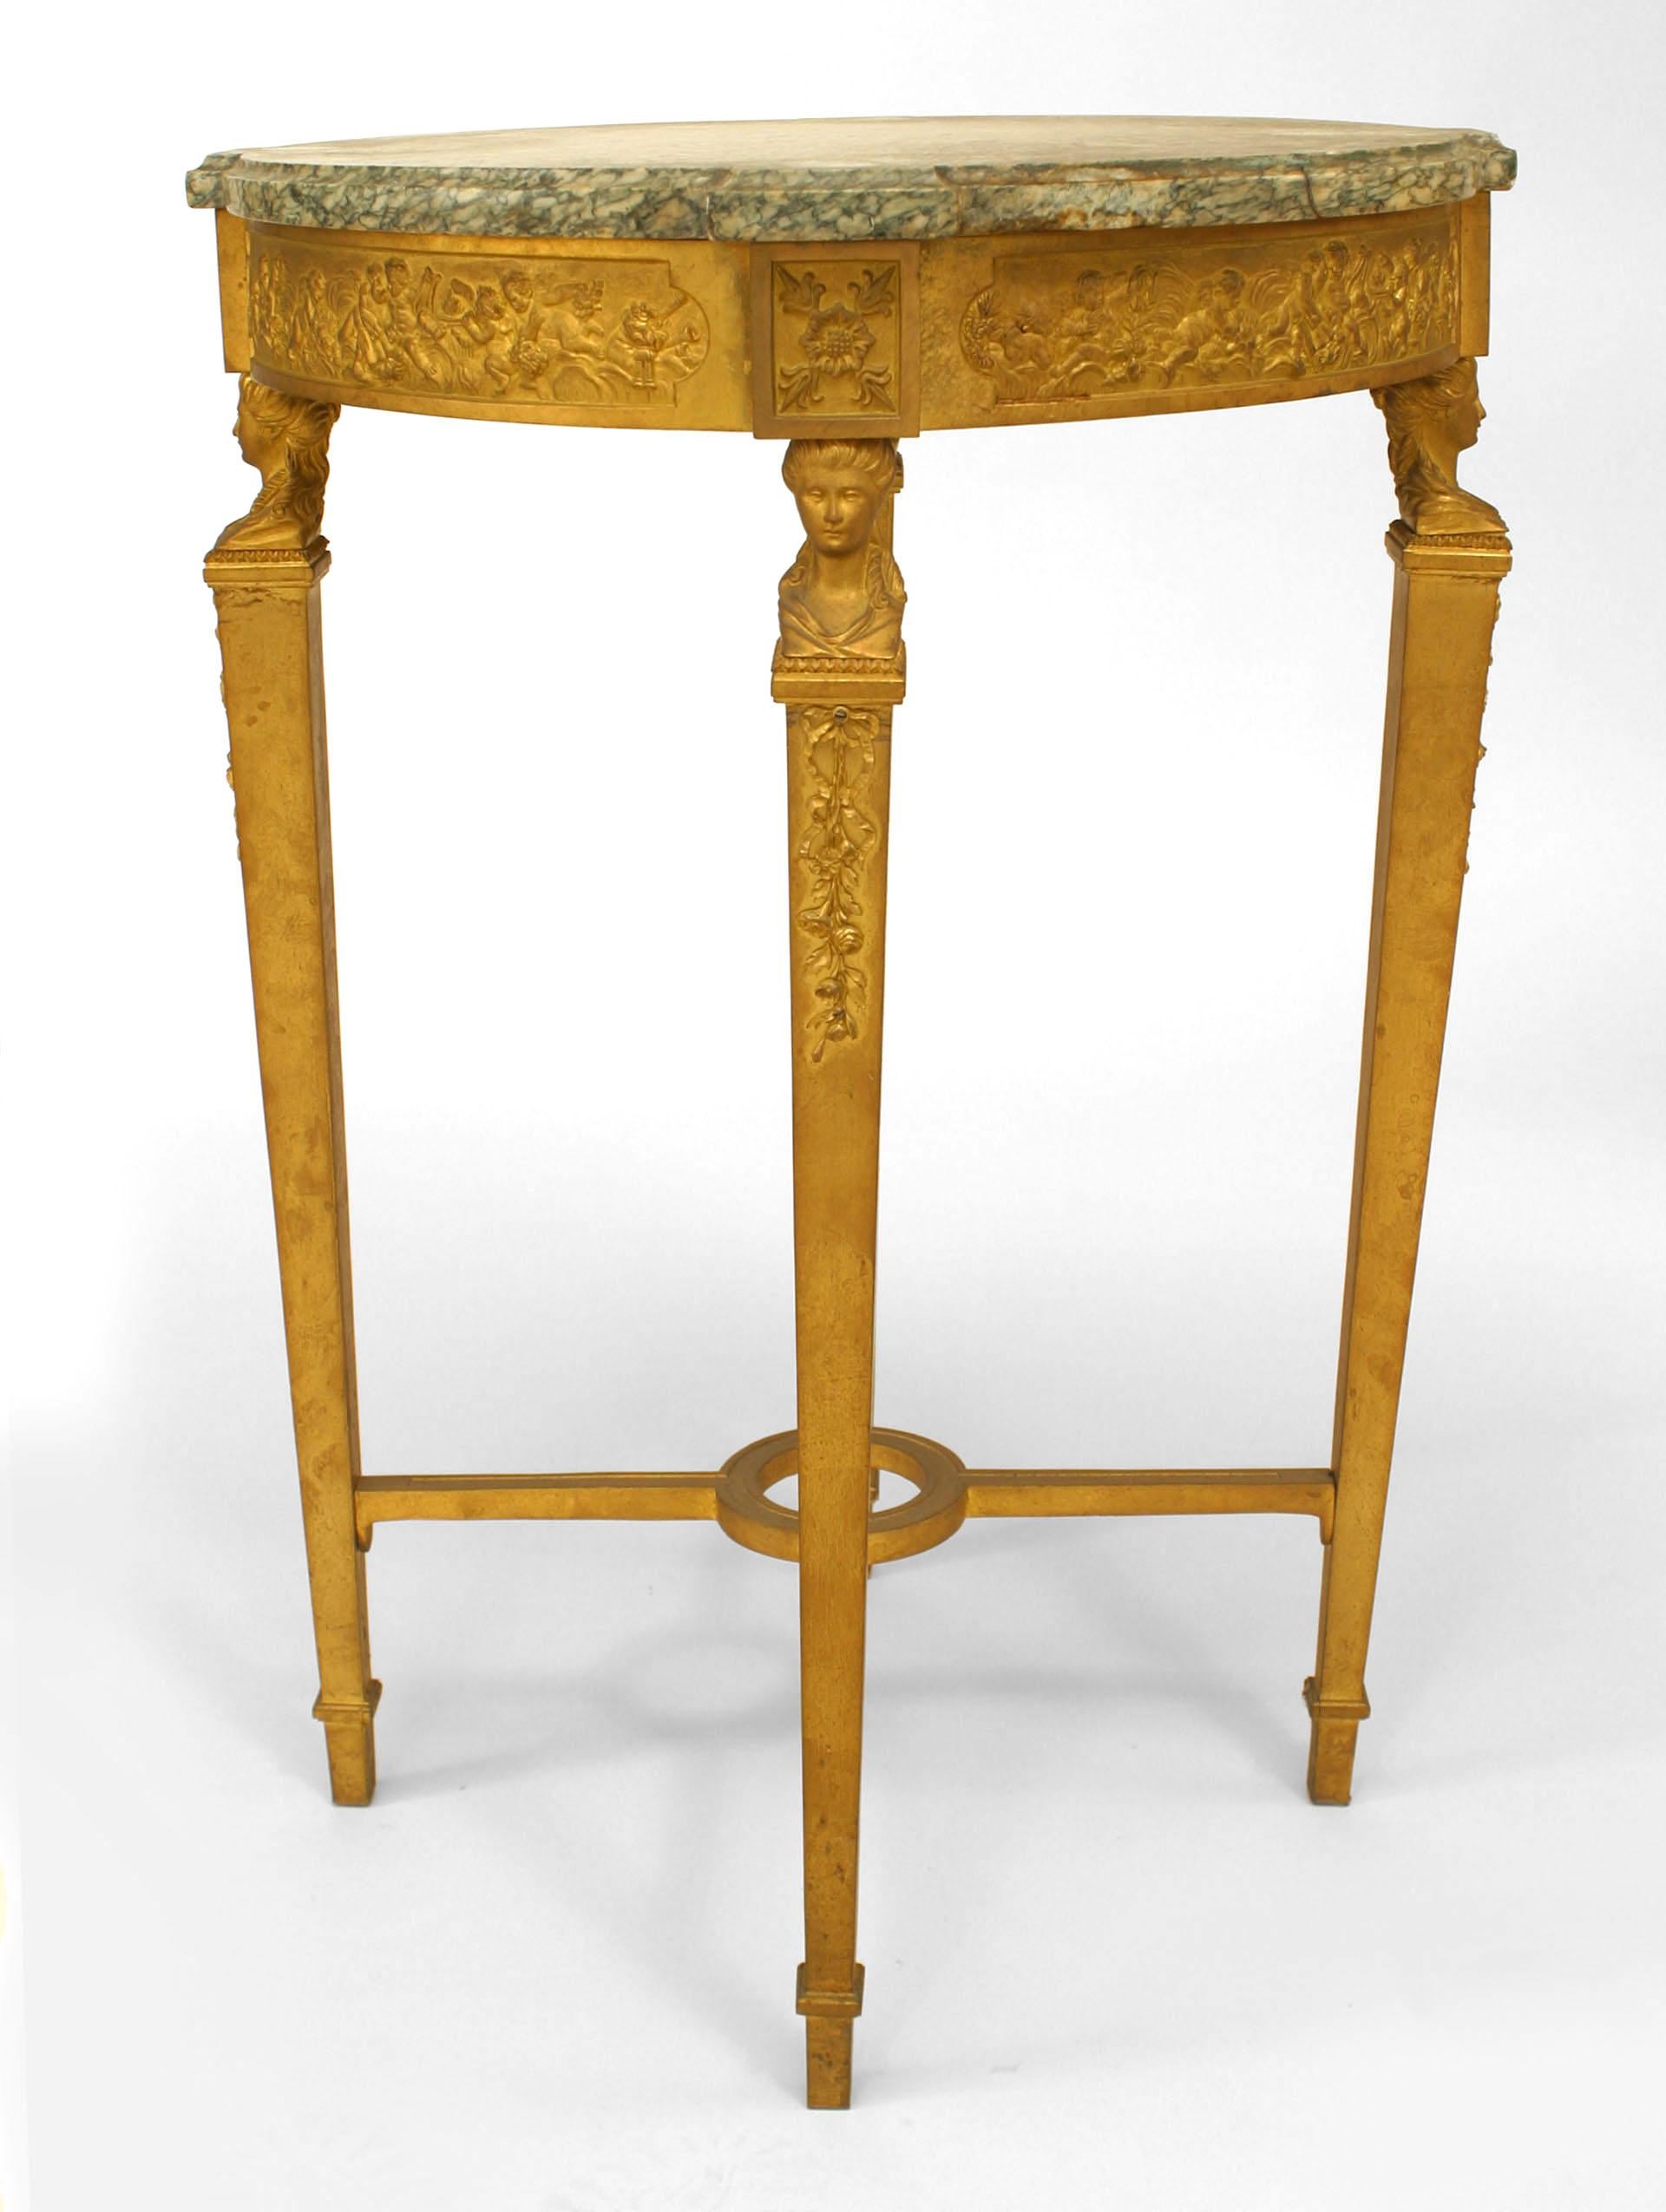 French Louis XVI-style (19th Century) bronze dore 4 legged end table with female heads, stretcher, and green marble top.
